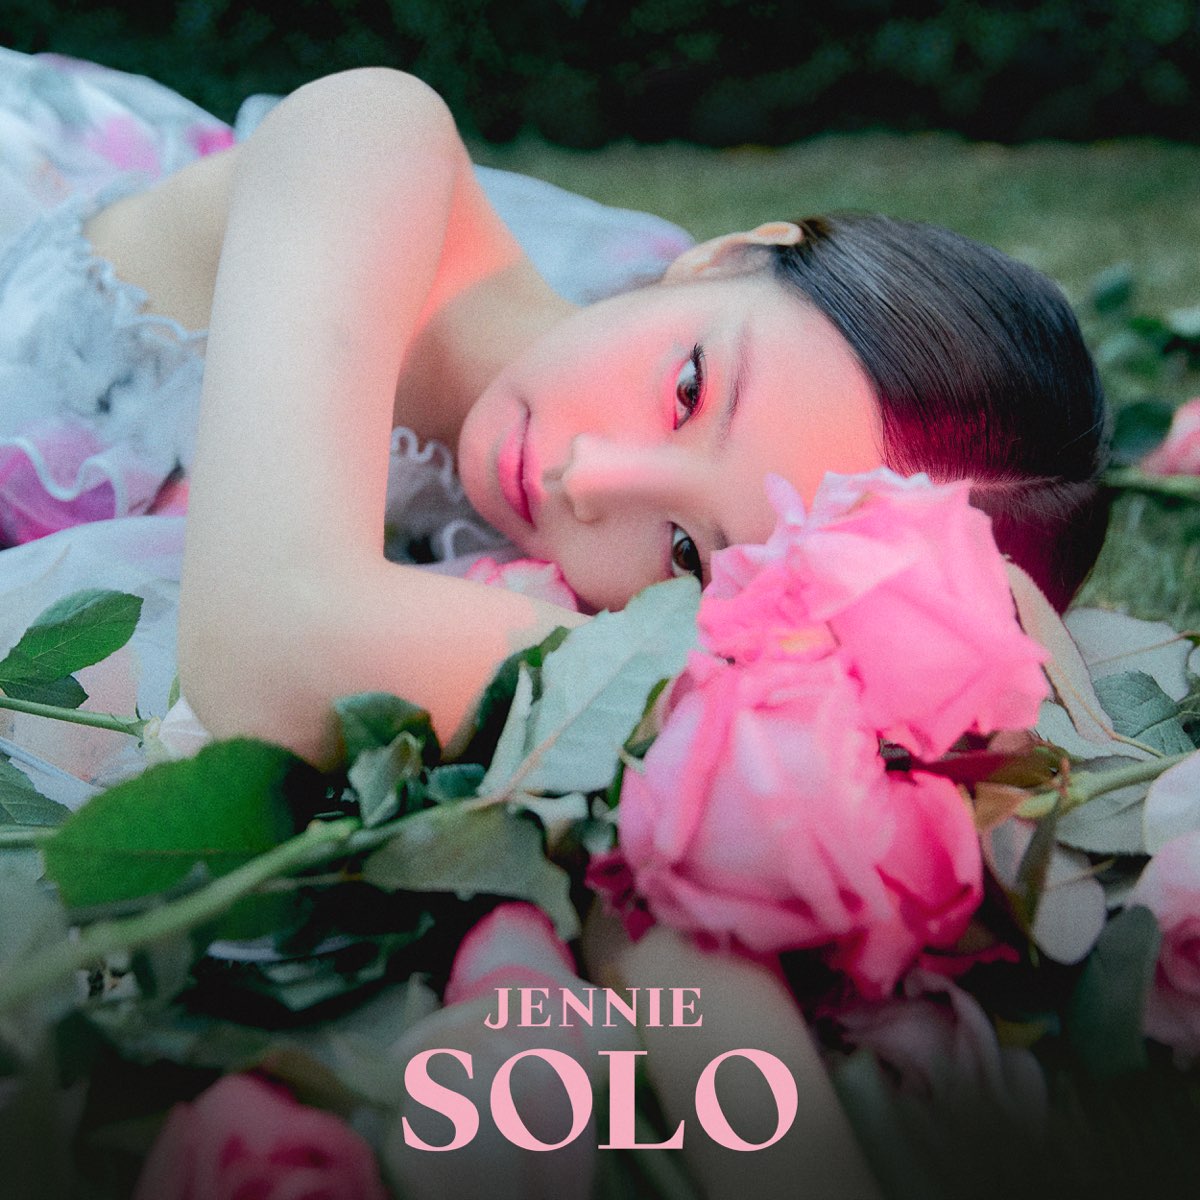 ‎SOLO - Single - Album by JENNIE (from BLACKPINK) - Apple Music